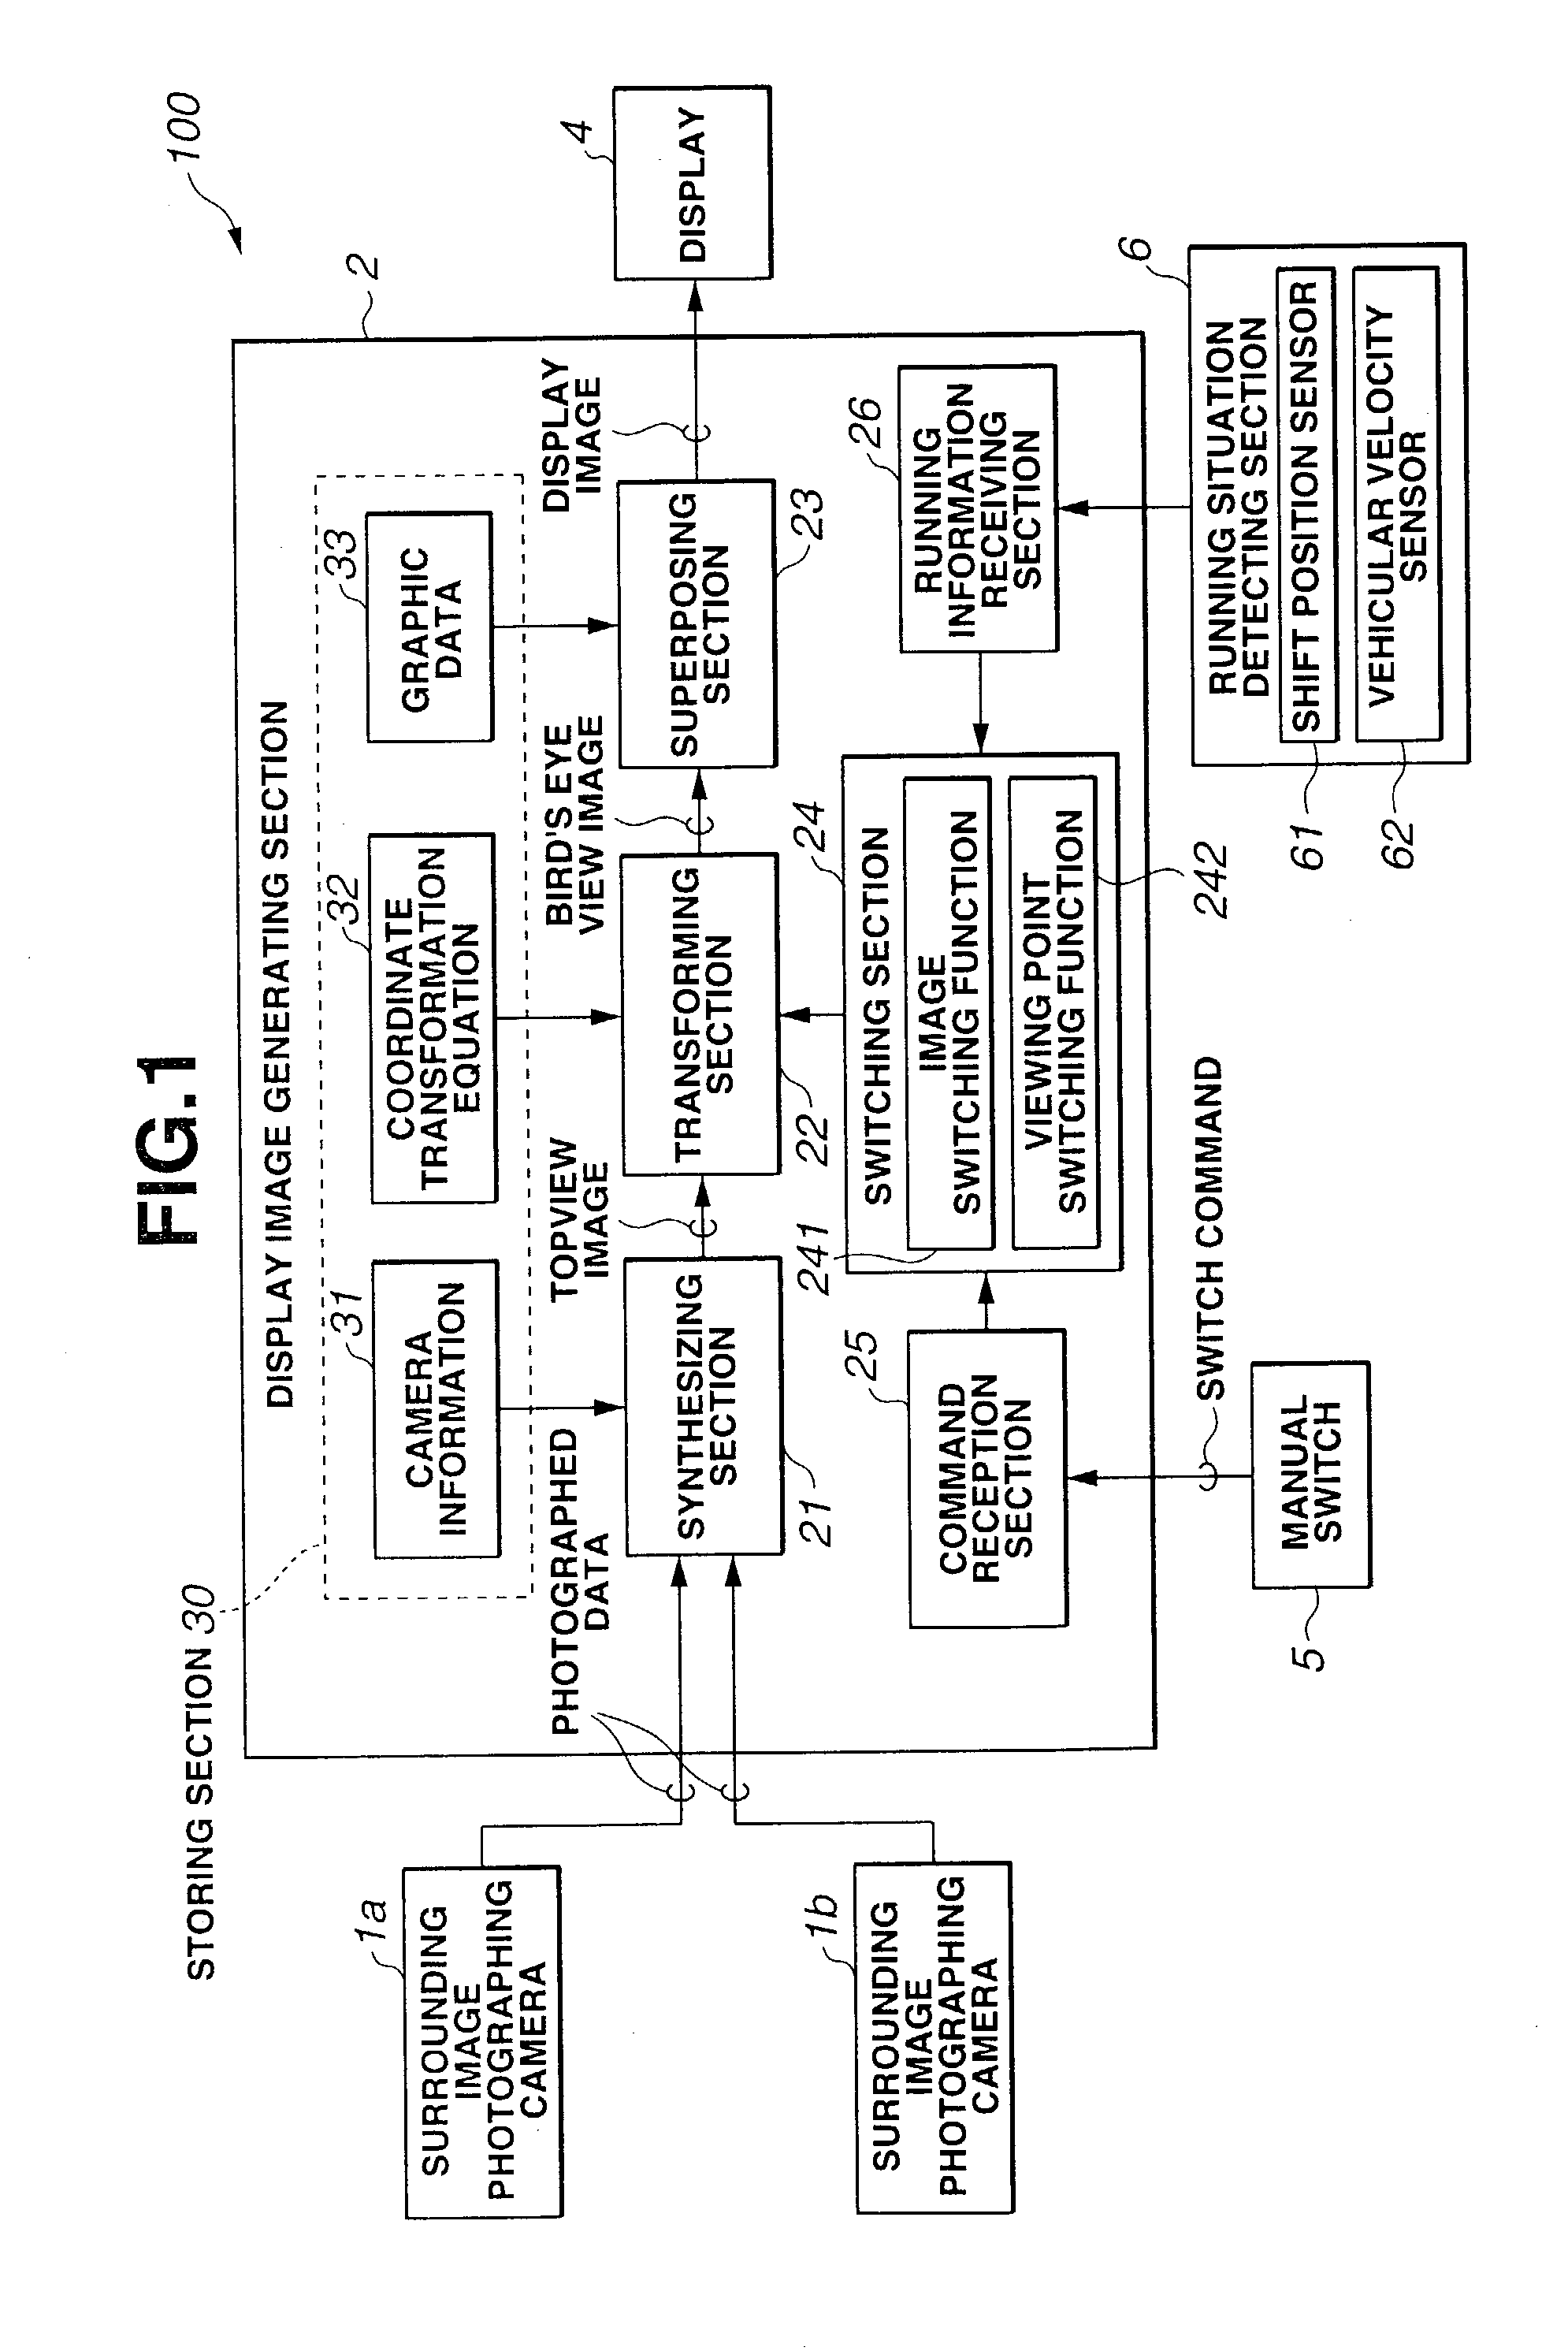 Image display apparatus, method, and program for automotive vehicle